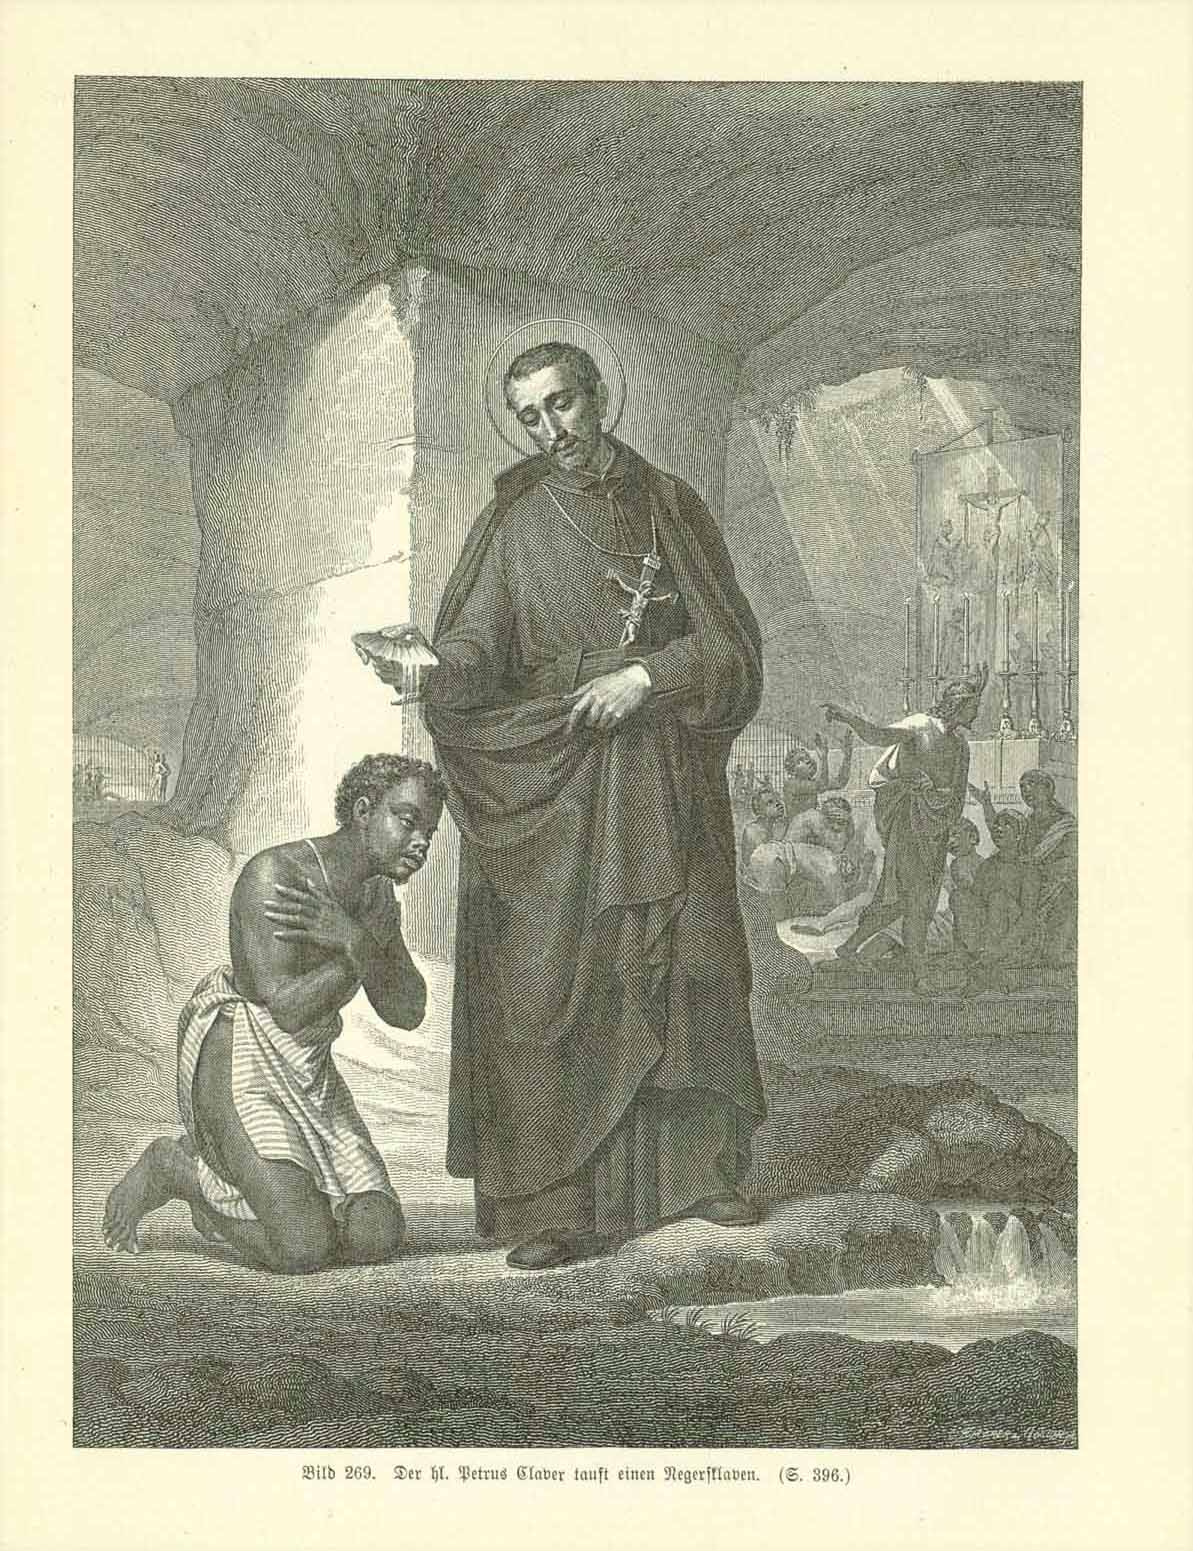 "Der Hl. Petrus Claver tauft einen Negrosklaven" (babptism of a Negro slave by St. Peter Claver)  Wood engraving published 1895. On the reverse side is text (in German) about the slave ships and work of the missionaries among the slaves.